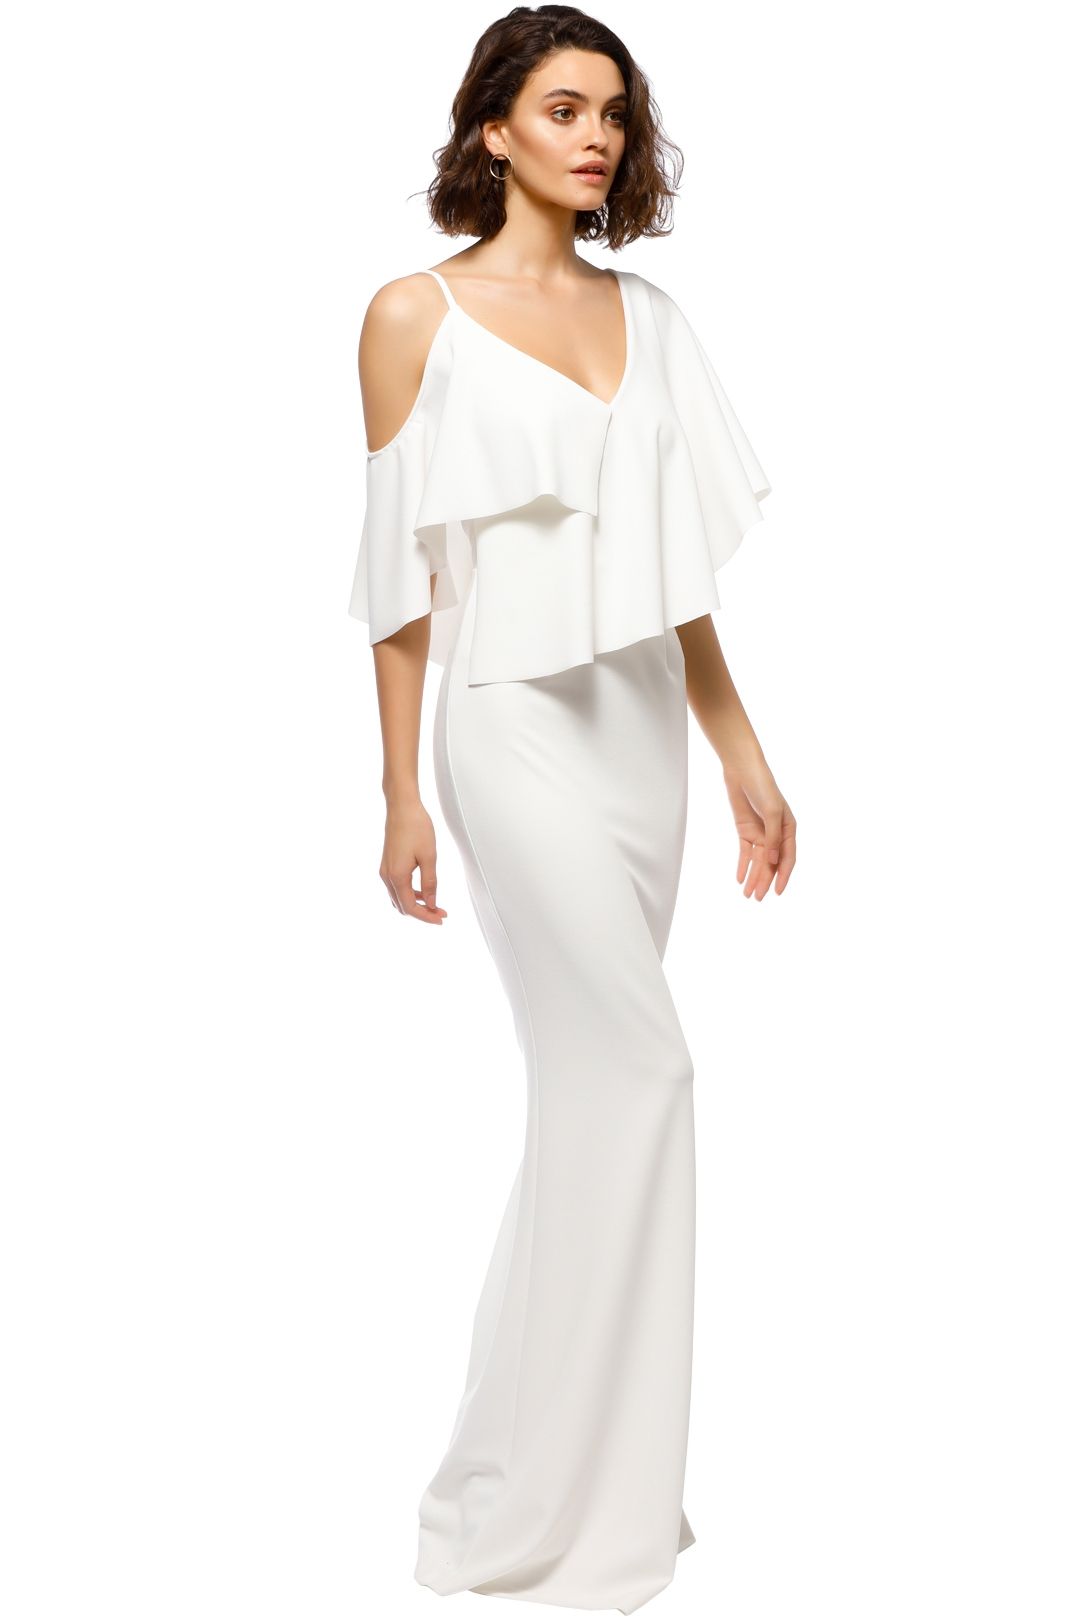 Pasduchas - Irreplaceable Gown - Ivory - Side